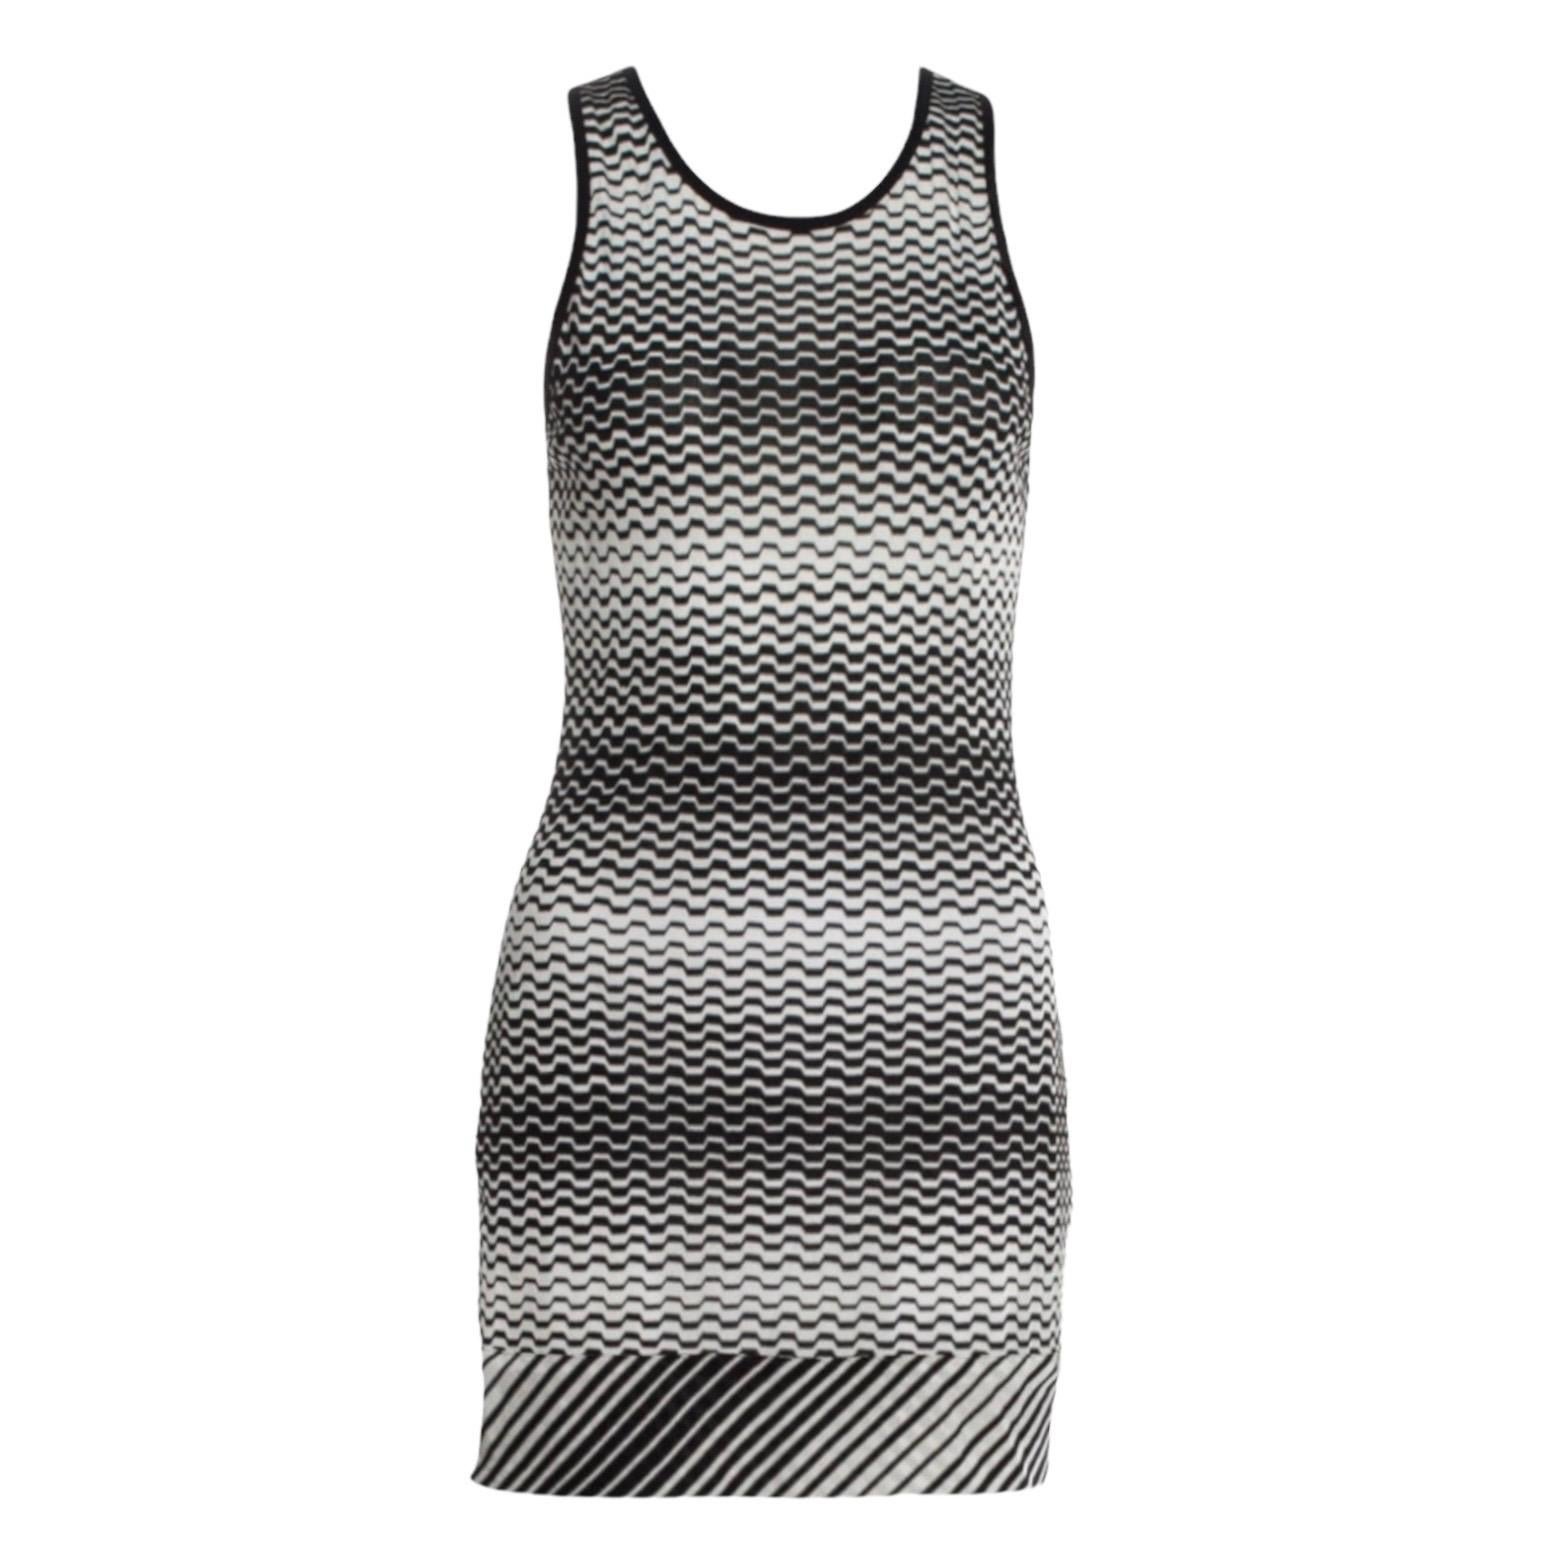 Missoni's monochrome striped dress has been crafted in Italy using the label's signature crochet-knit technique. The amazing shape makes it perfect for slipping on over a bikini or to dress it up with heels for a night out.


Missoni signature black